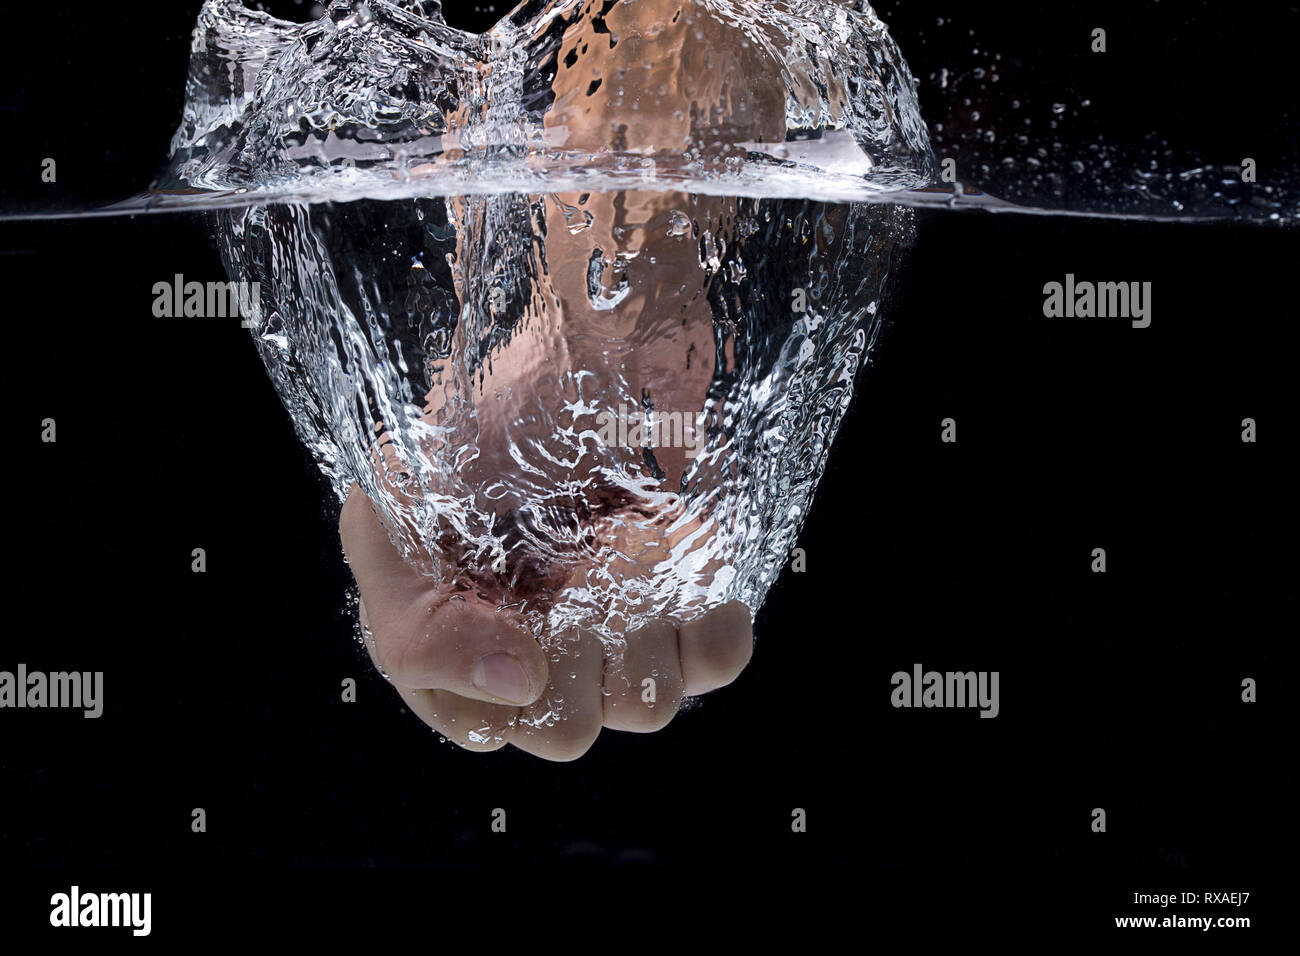 A concept photo of a fist punching into water in a studio setting. Stock Photo